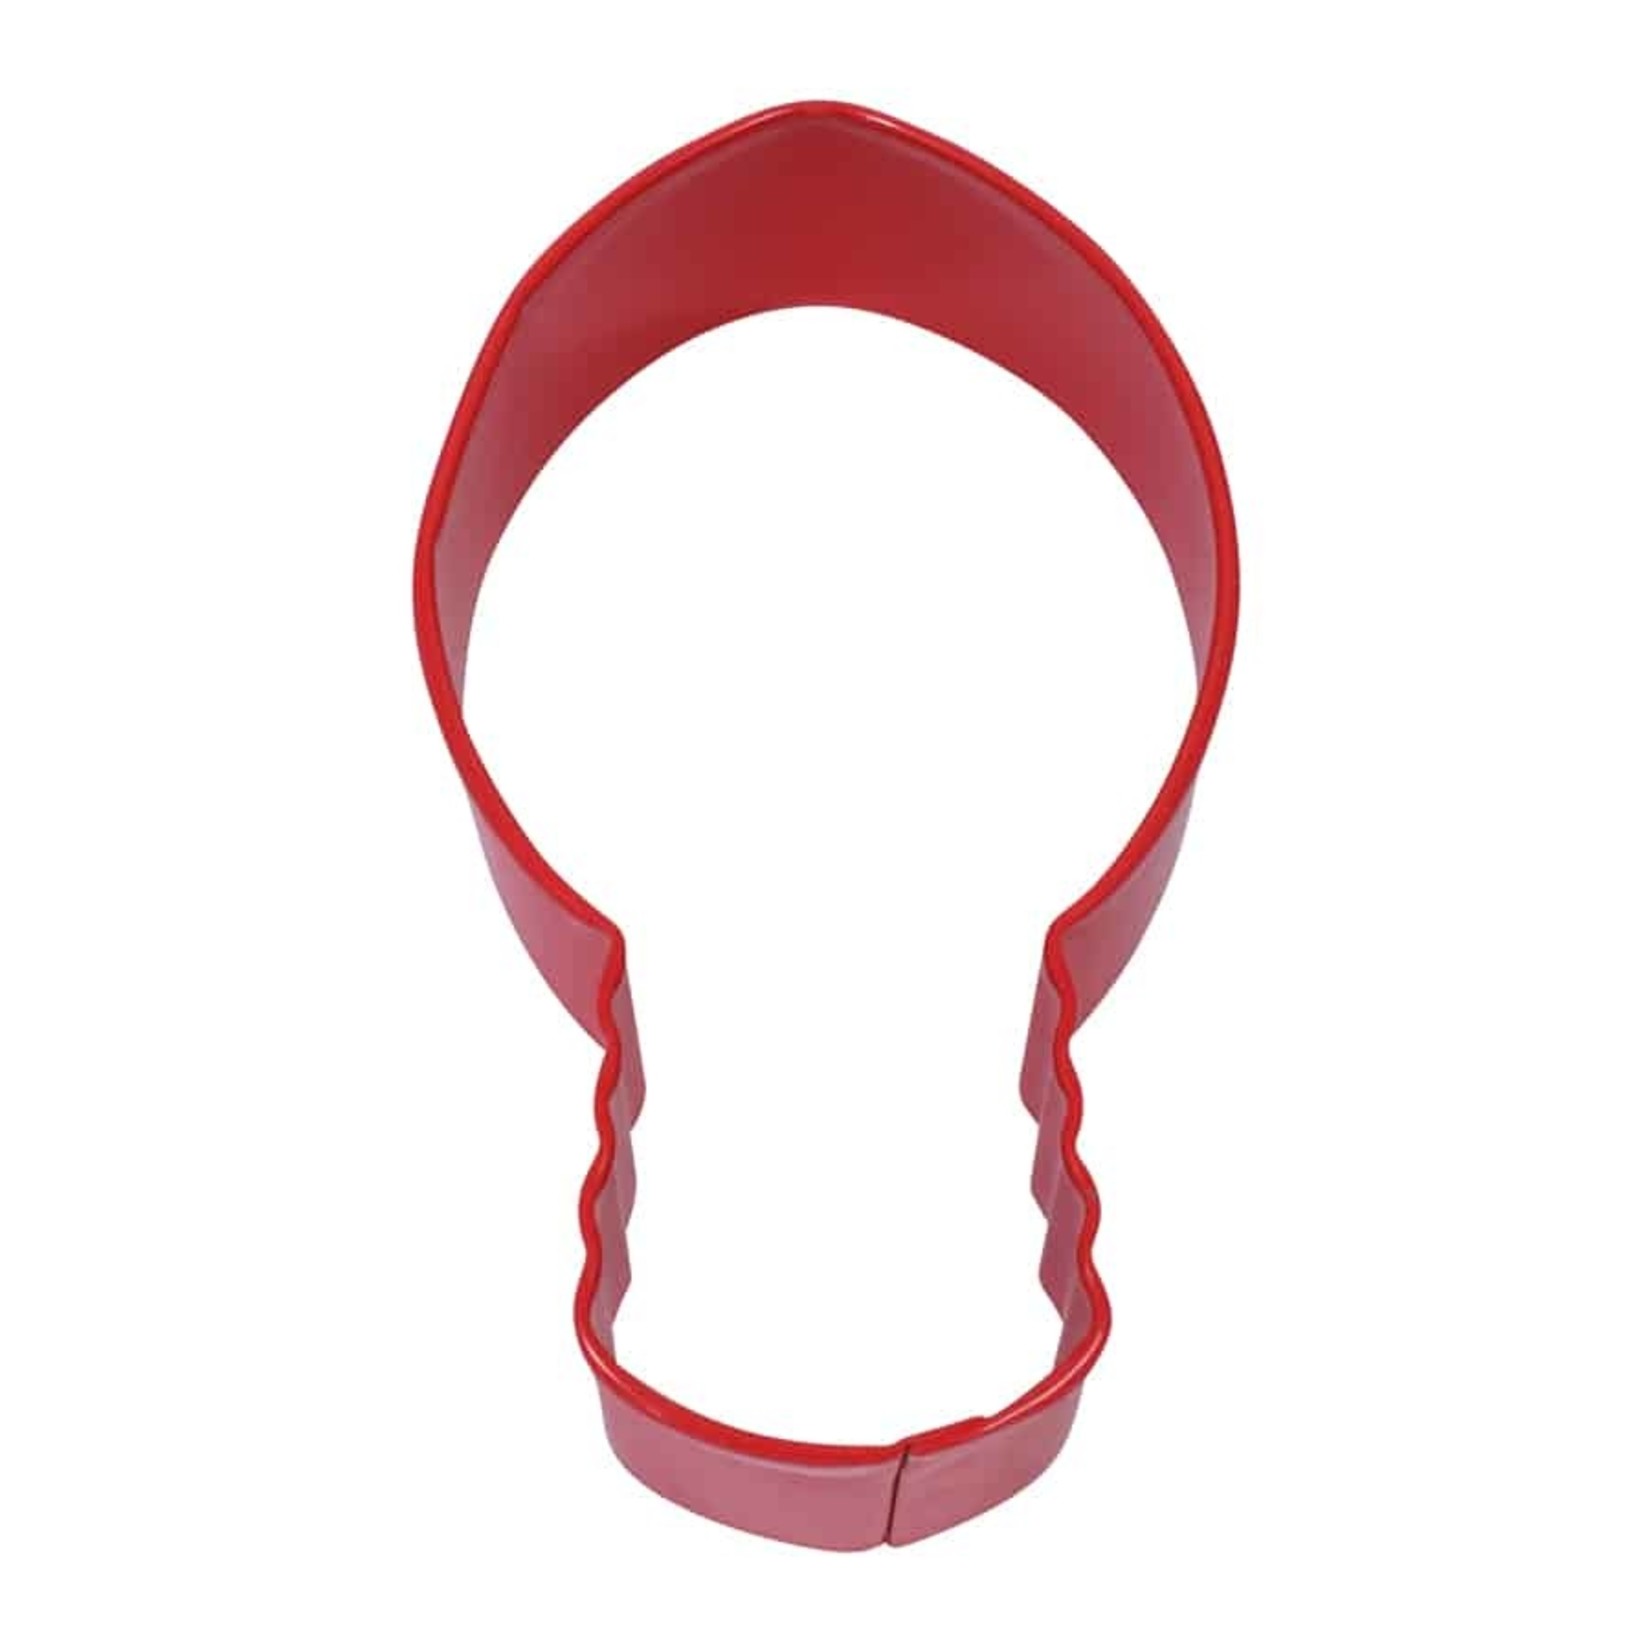 R&M INTERNATIONAL R&M Cookie Cutter Light Bulb Holiday 4.25” Red